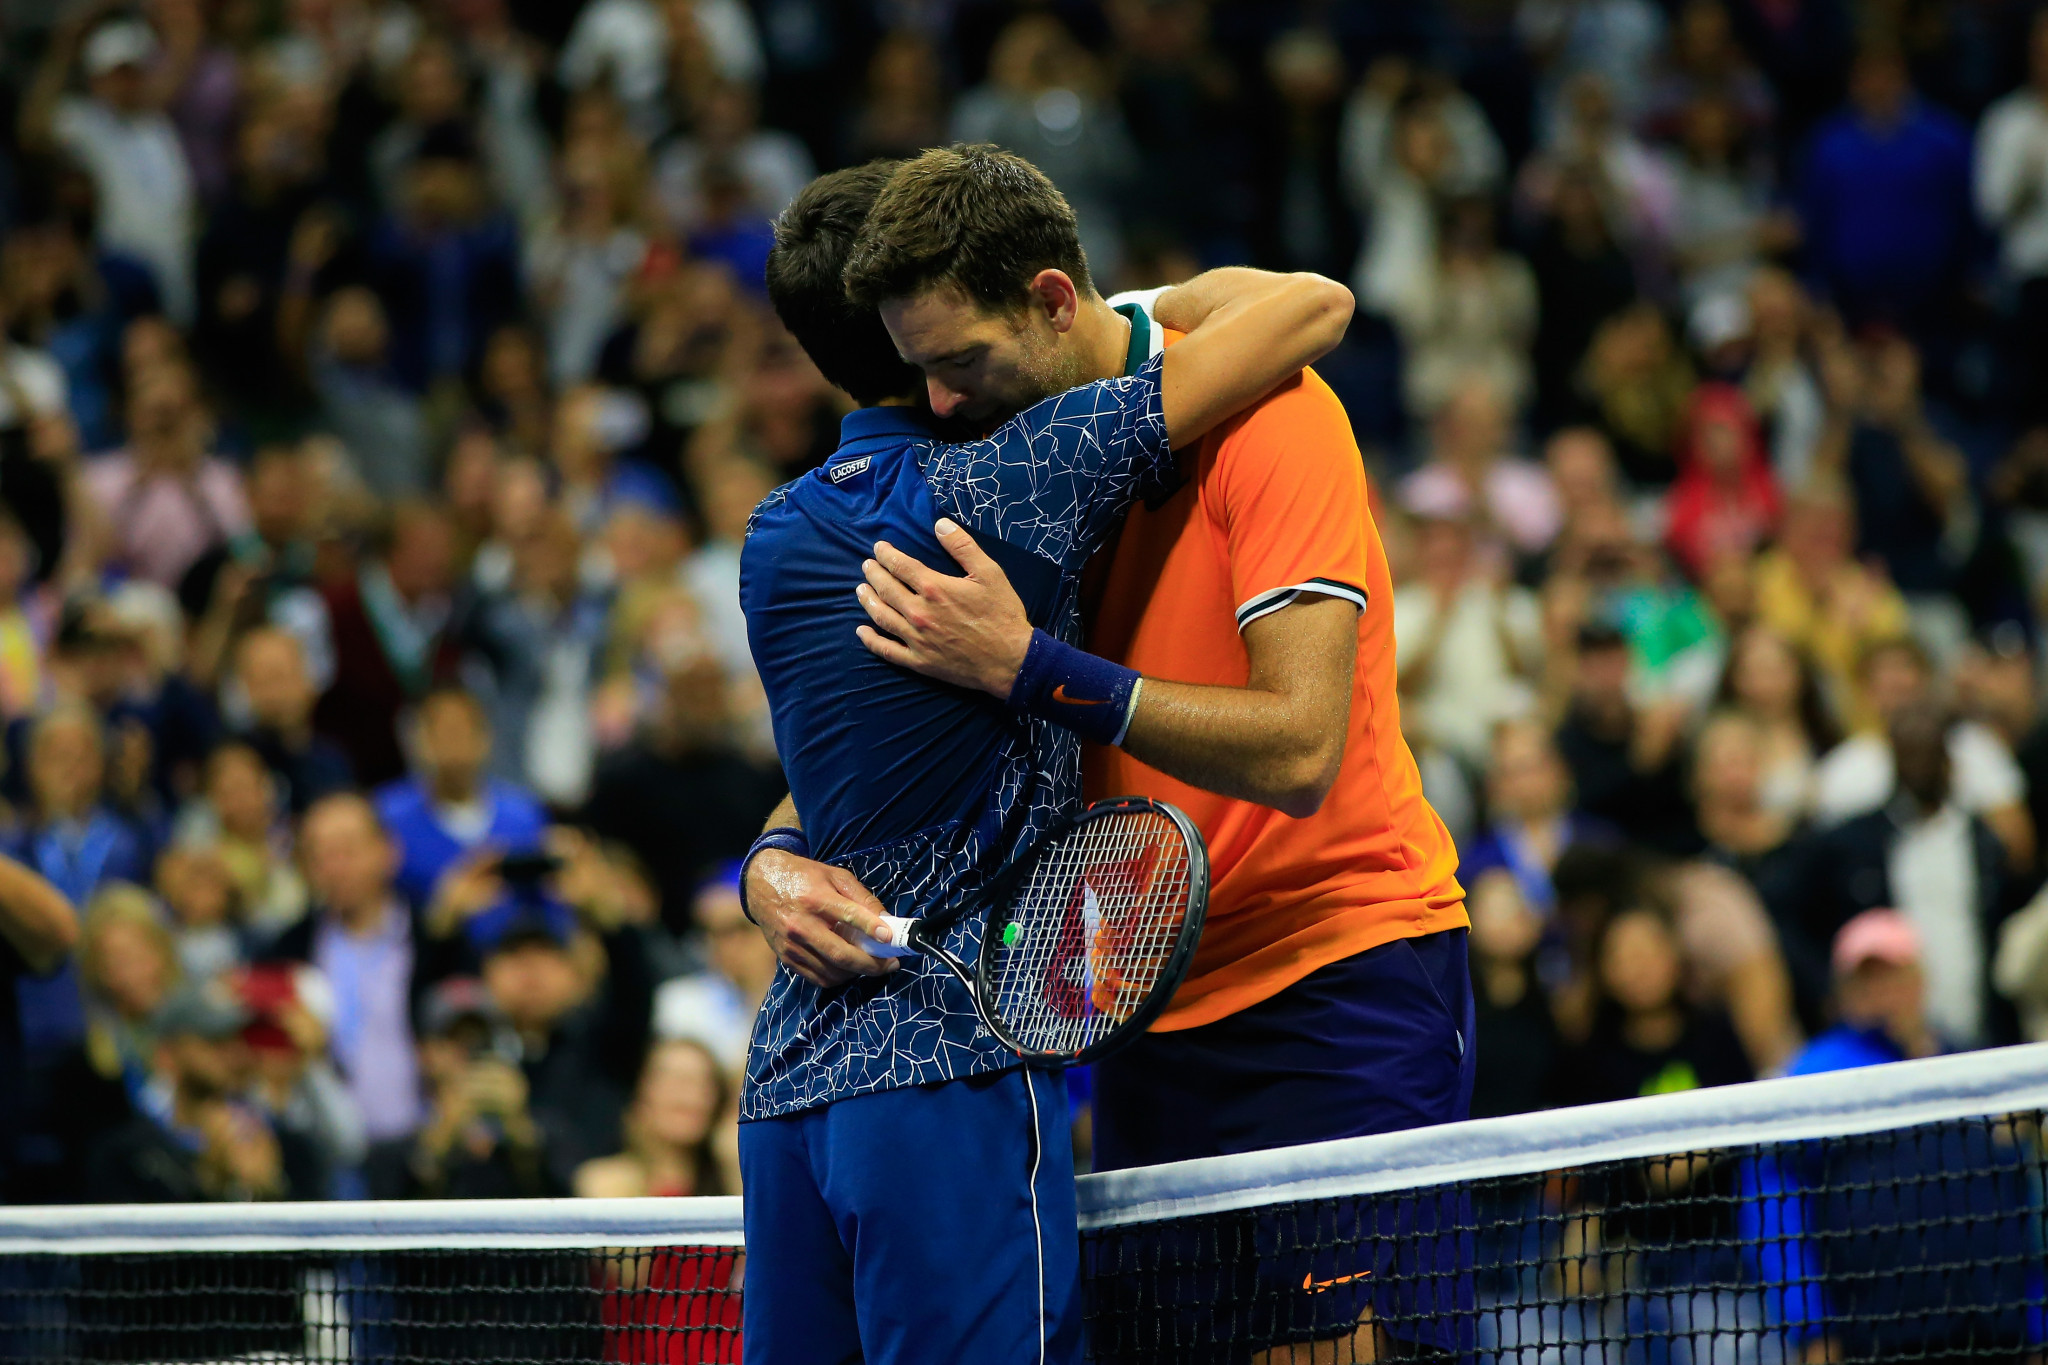 Novak Djokovic beat Juan Martin del Potro to win the US Open for a third time ©Getty Images